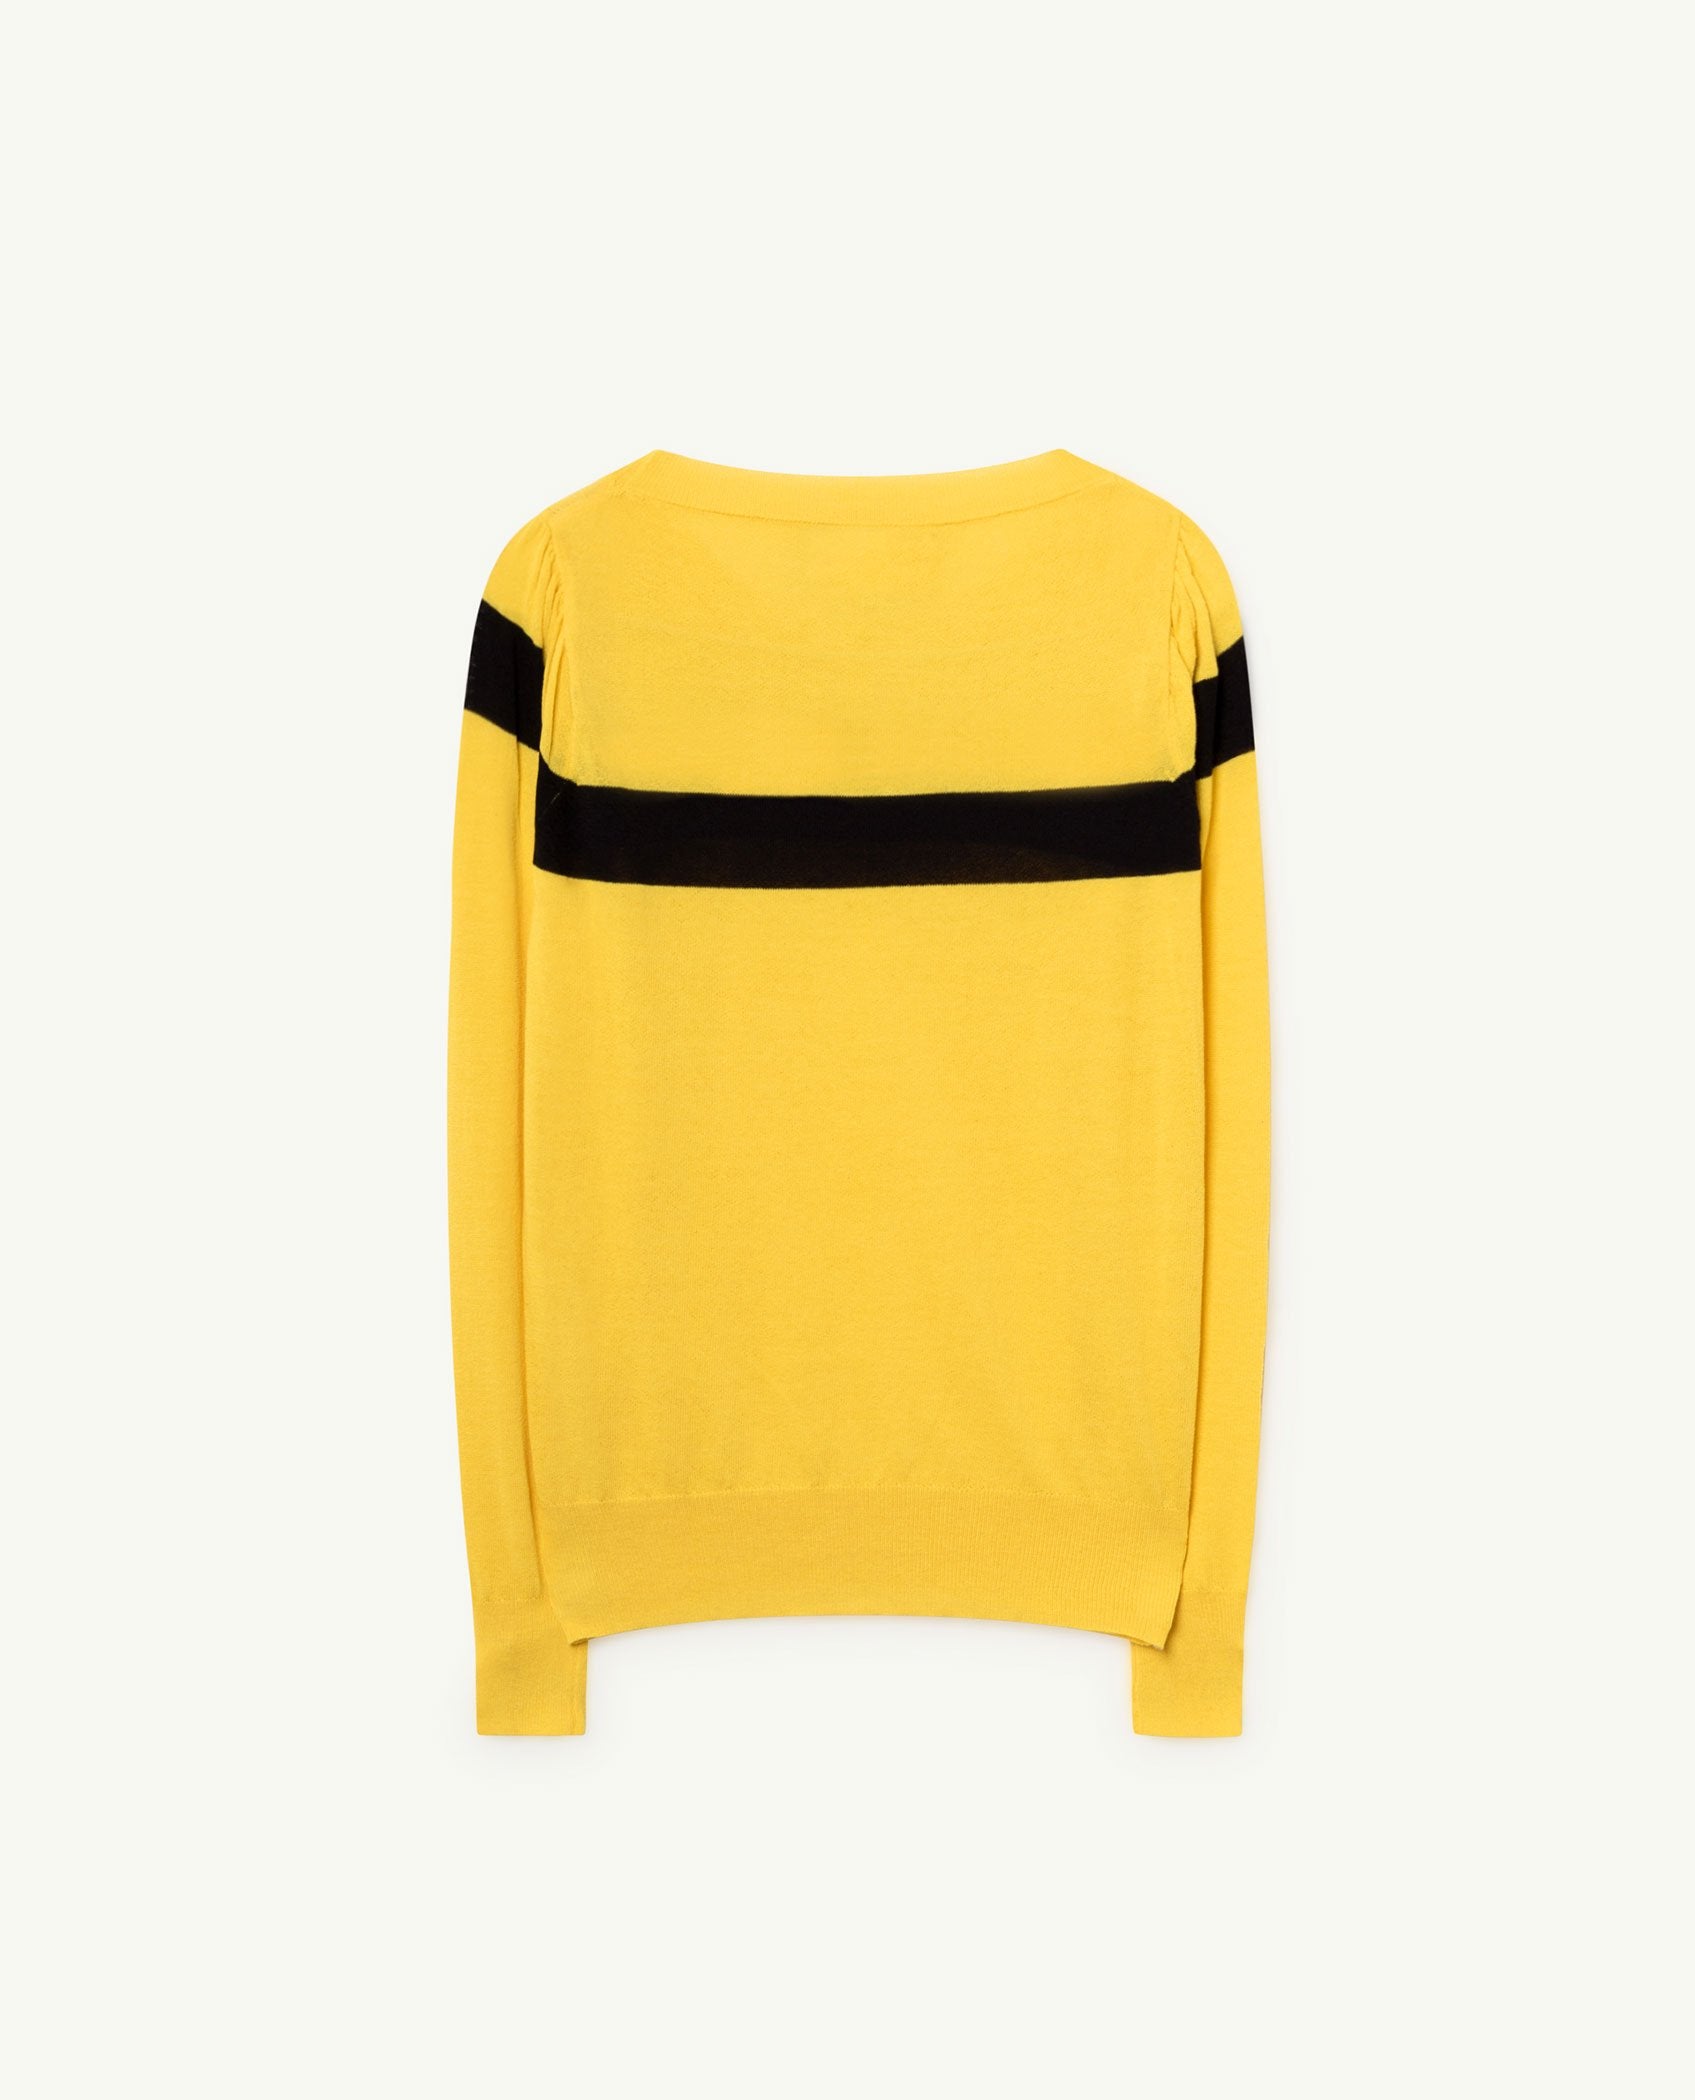 Yellow Condor Sweater PRODUCT BACK